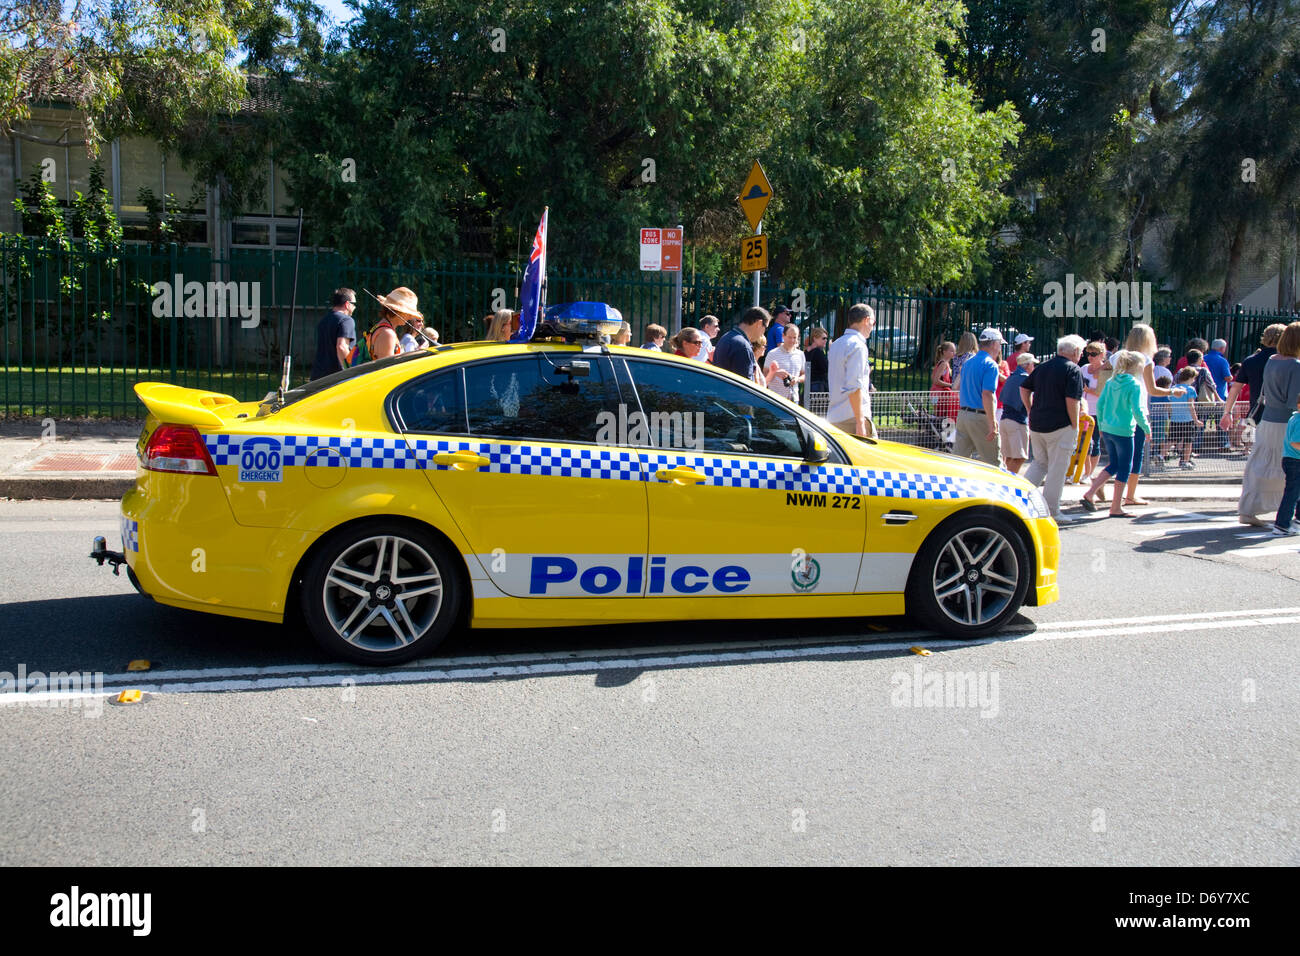 ANZAC day parade in Avalon Beach Sydney, police saloon car forms part of the march celebrations,Sydney,NSW,Australia Stock Photo